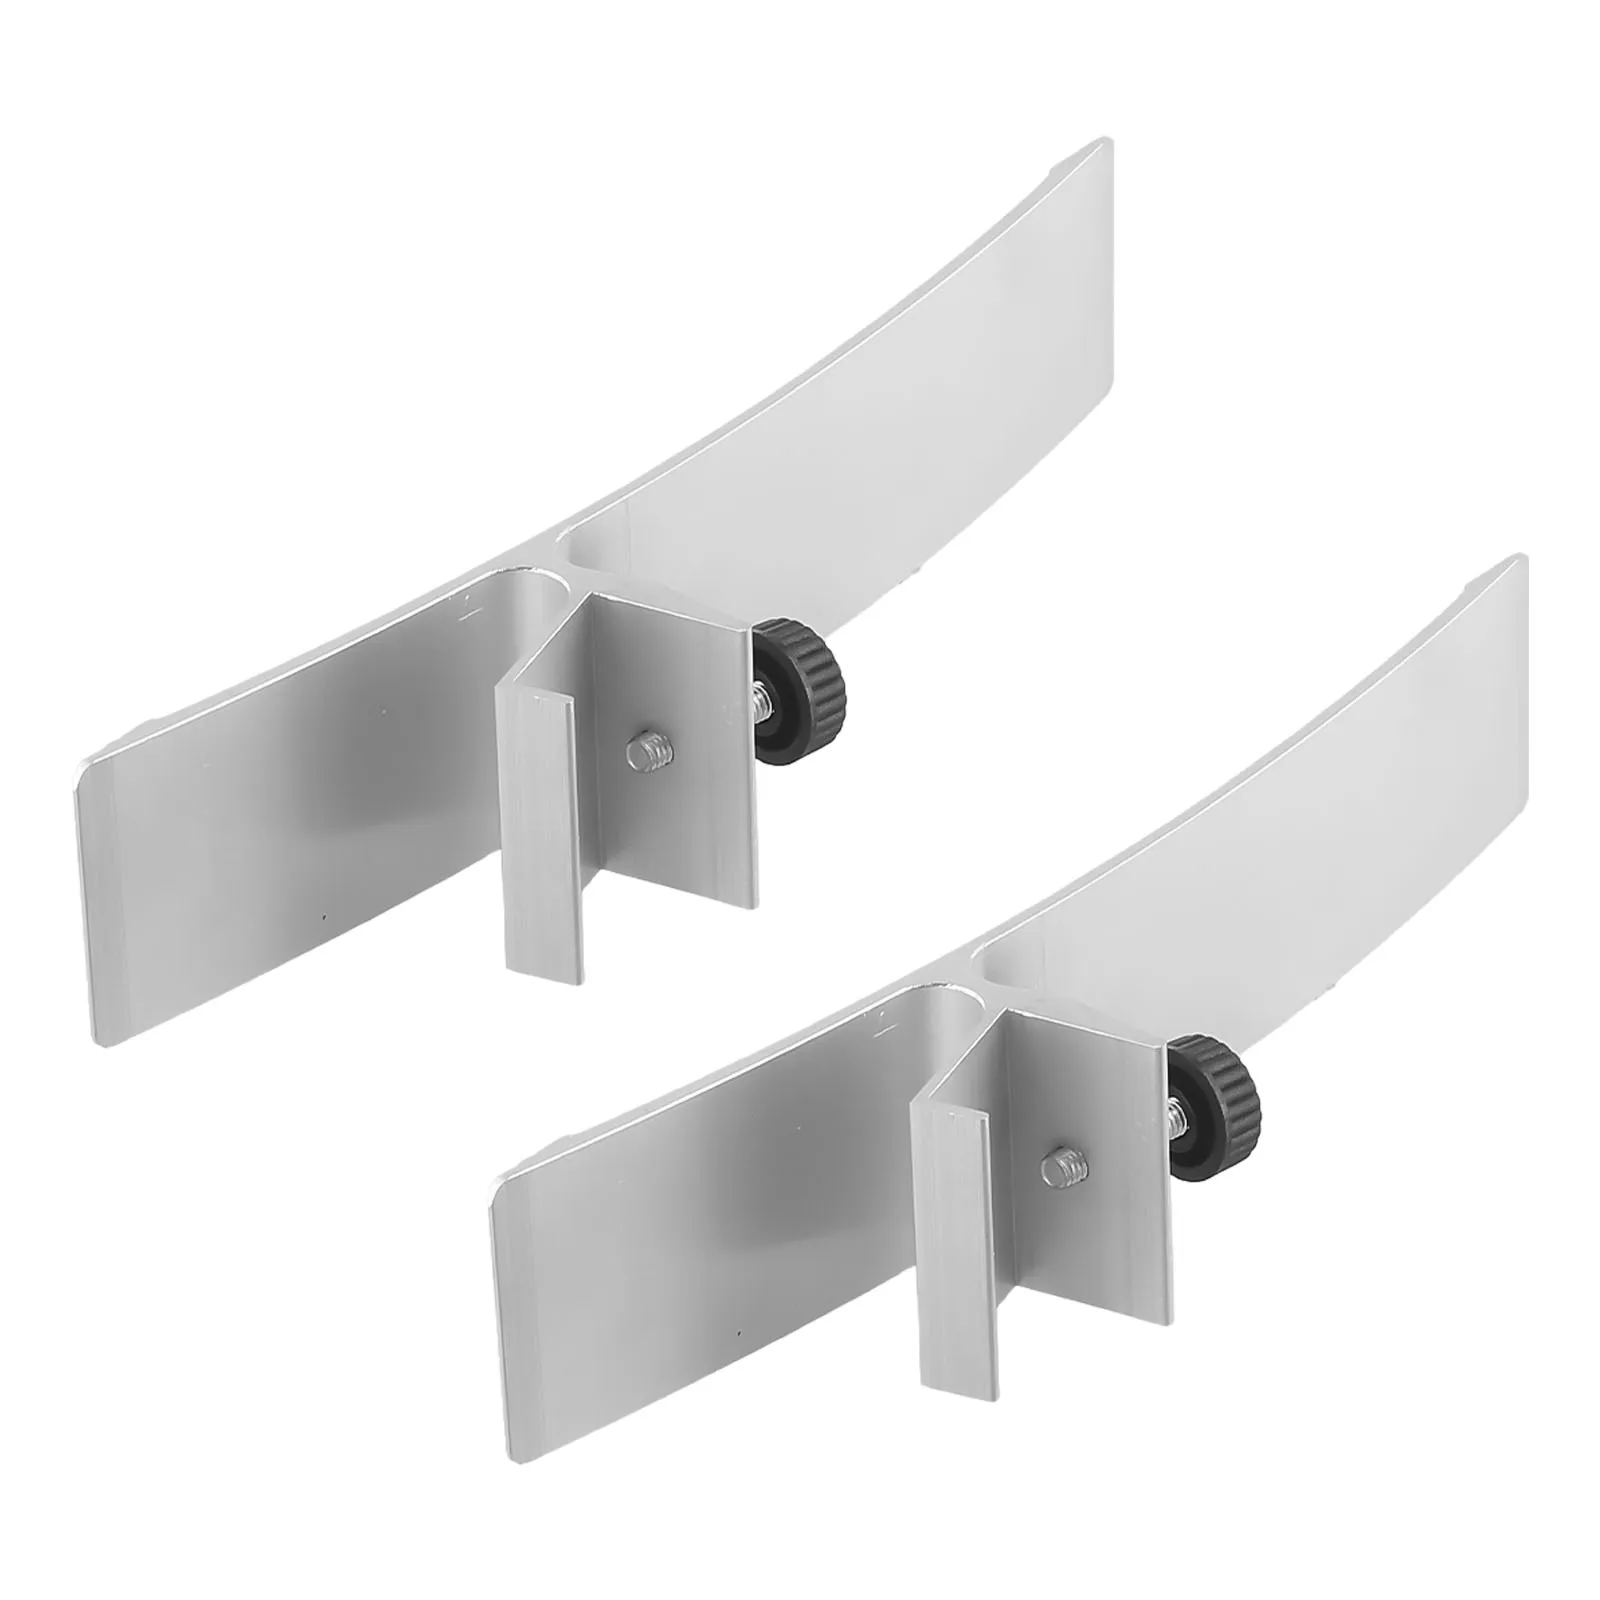 

Stands Bracket Aluminum Alloy Base Set Bracket For Infrared Heating Panels Hardware Accessories Portable 1pair